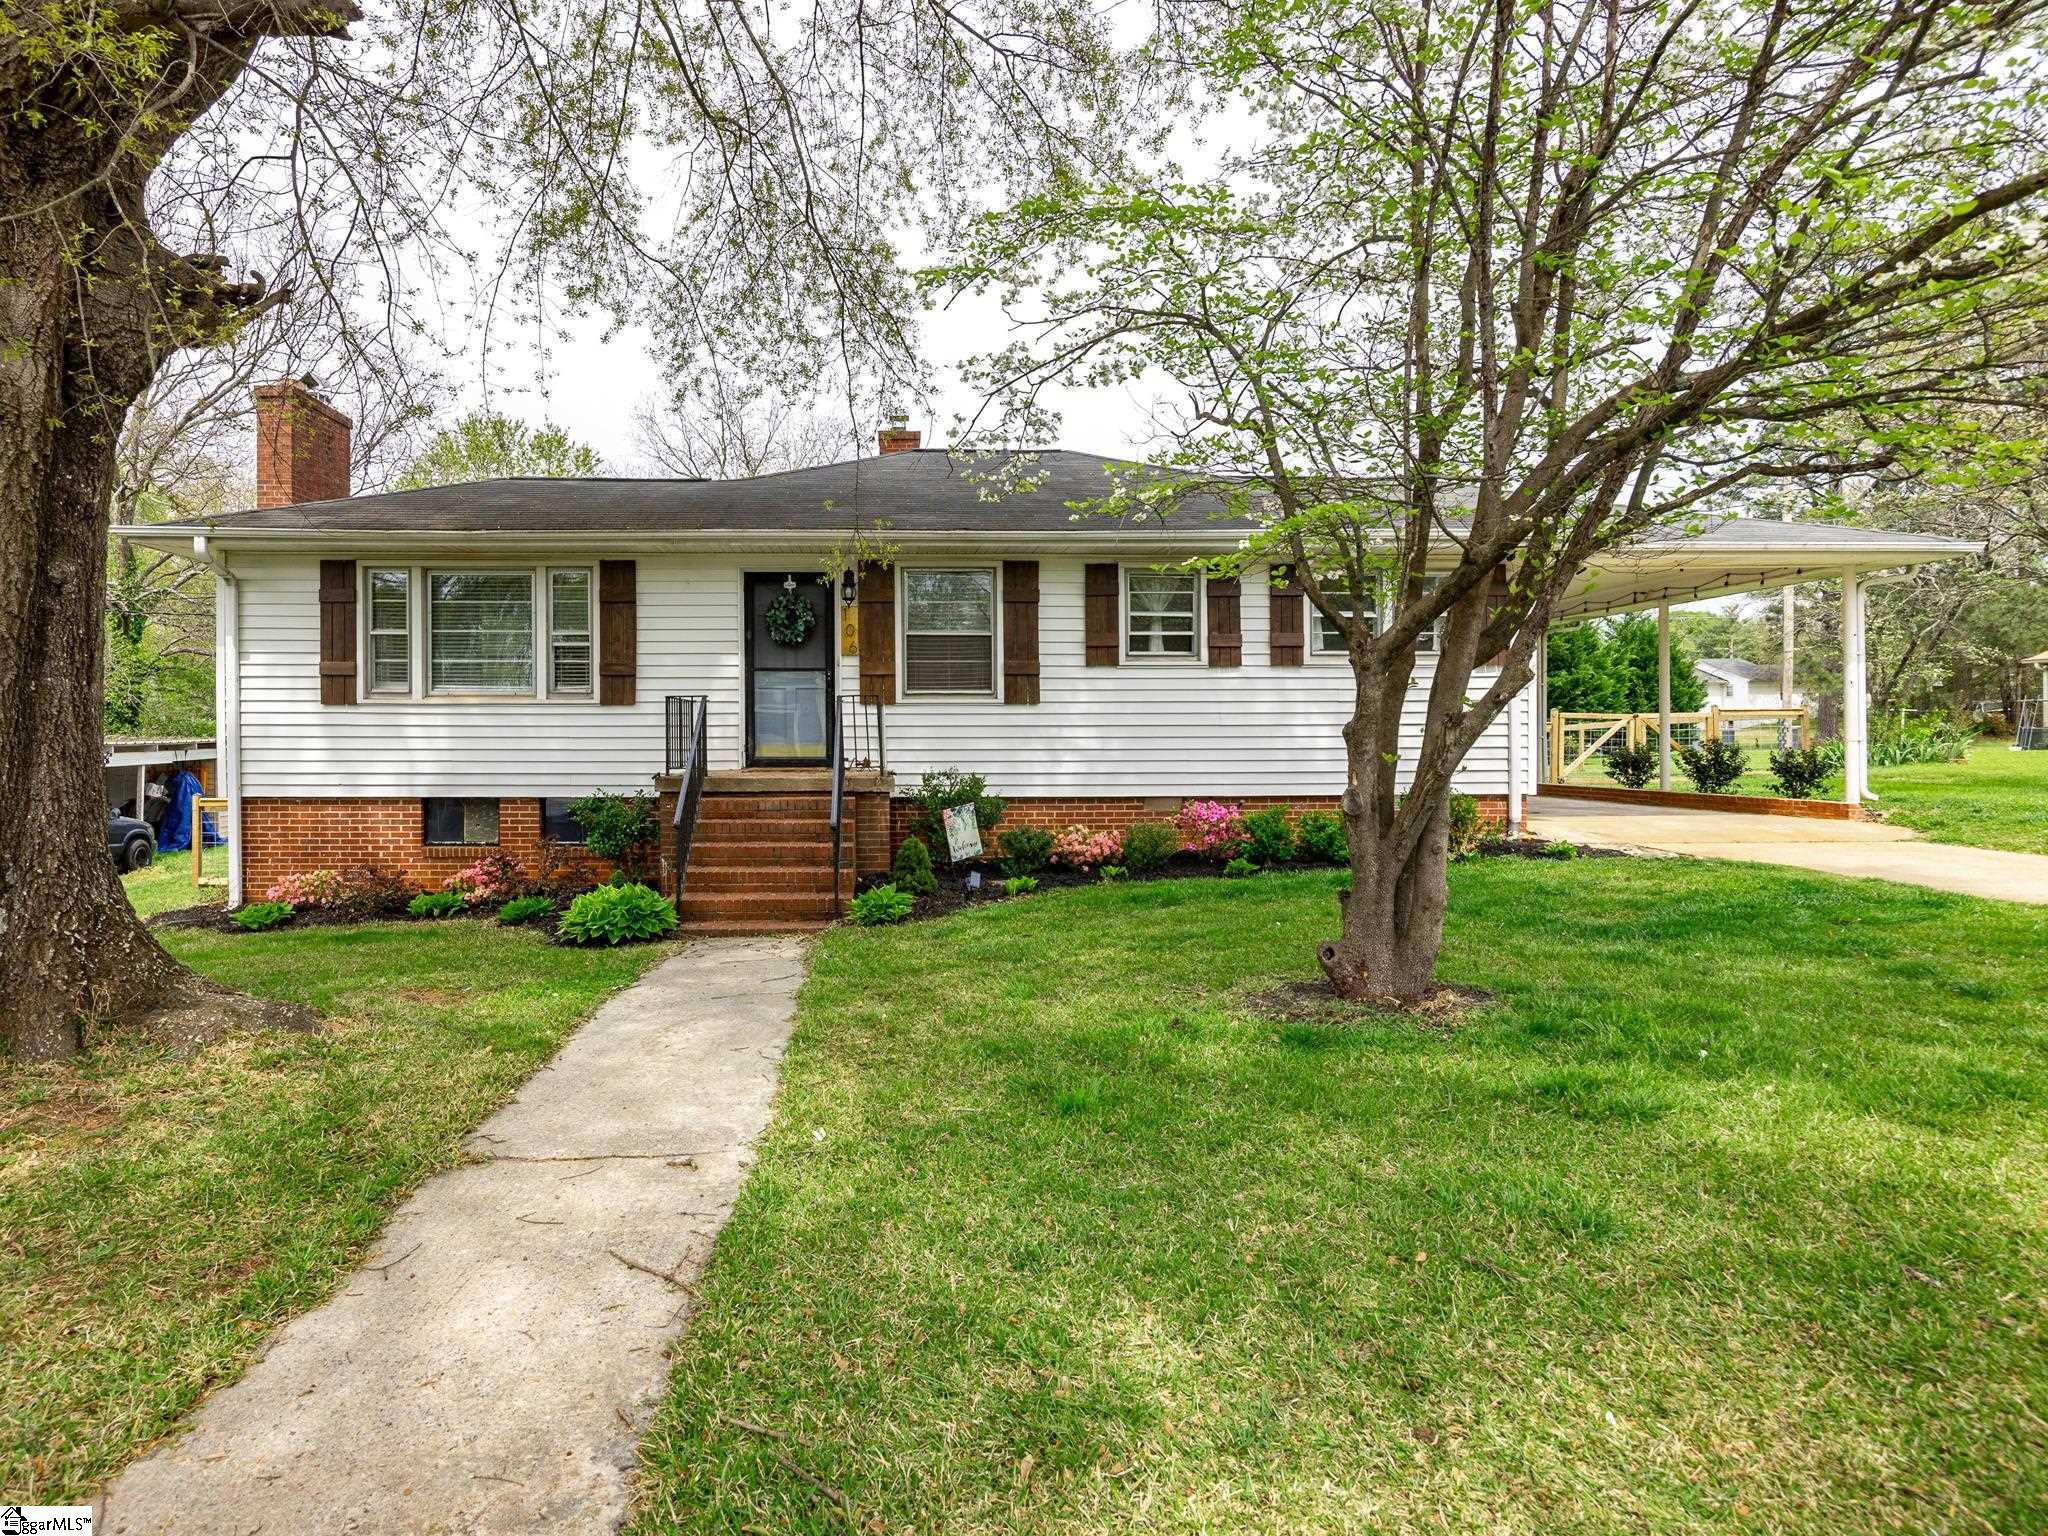 Charming 2 Br, 1.5 bath home close to Downtown Greer with a large fenced yard. There are two large g